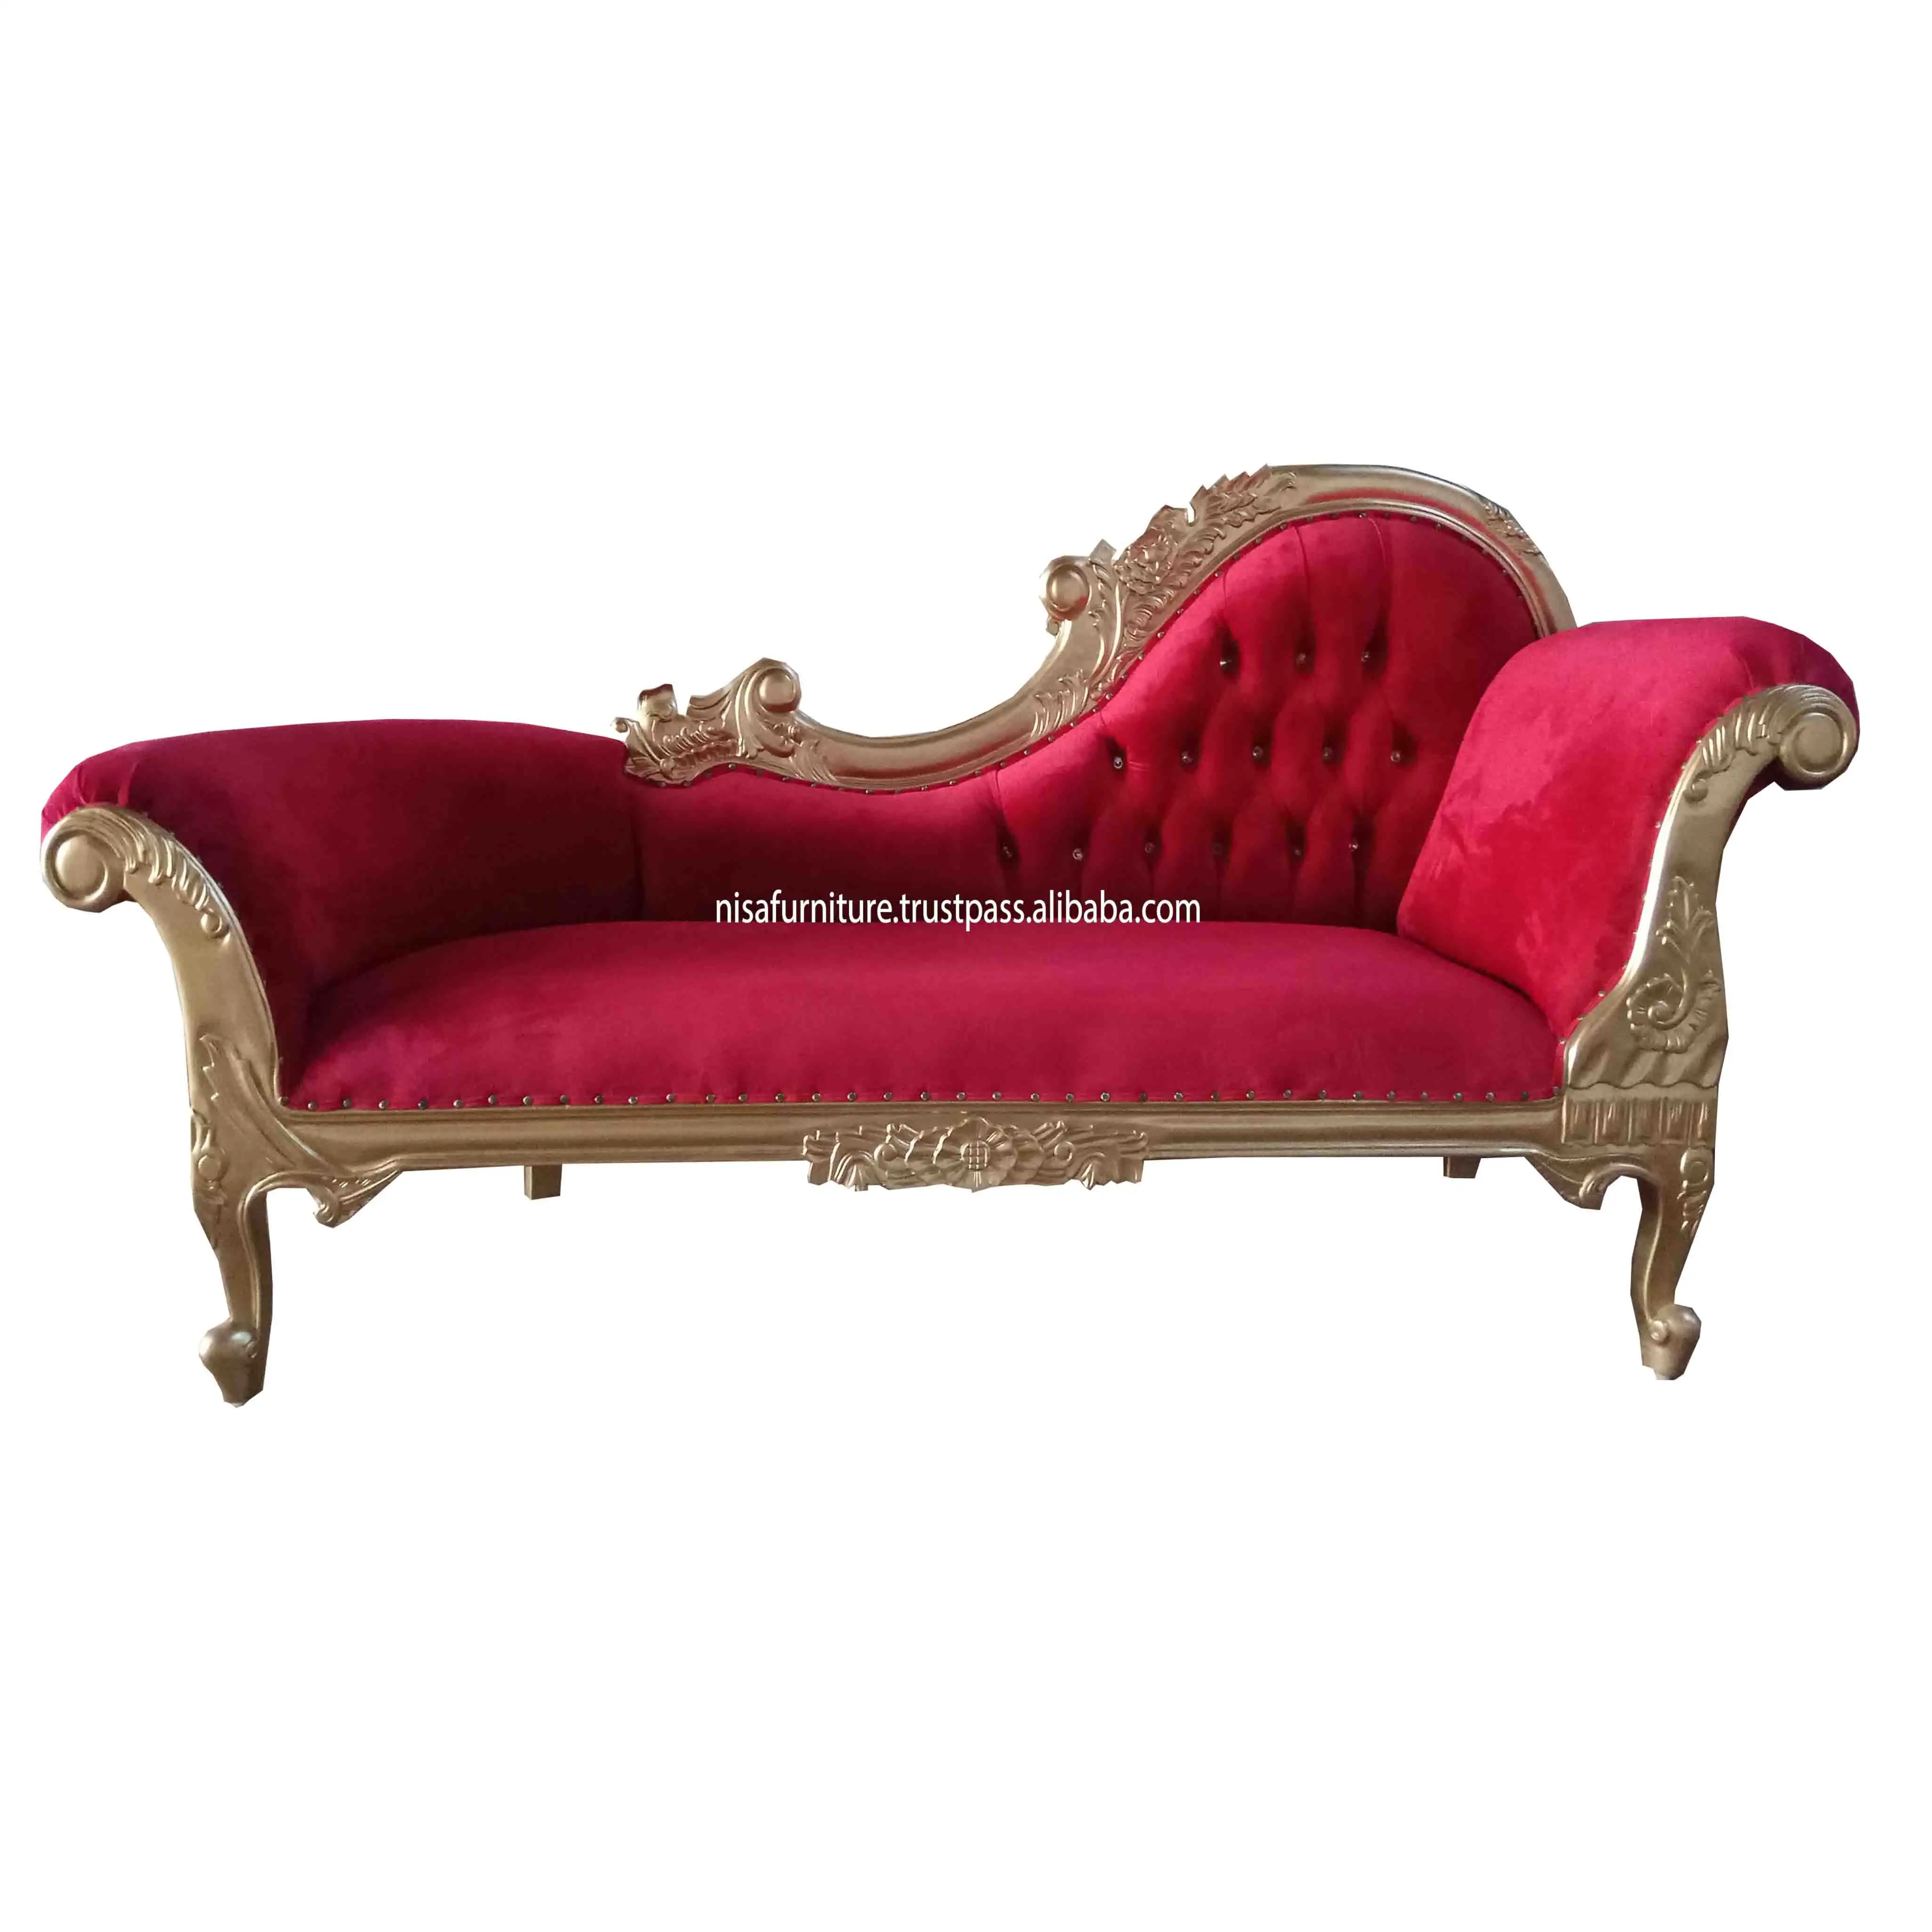 Wedding Red Velvet Indonesia Luxury Antique Chaise Lounge Sofa Furniture living room chairs